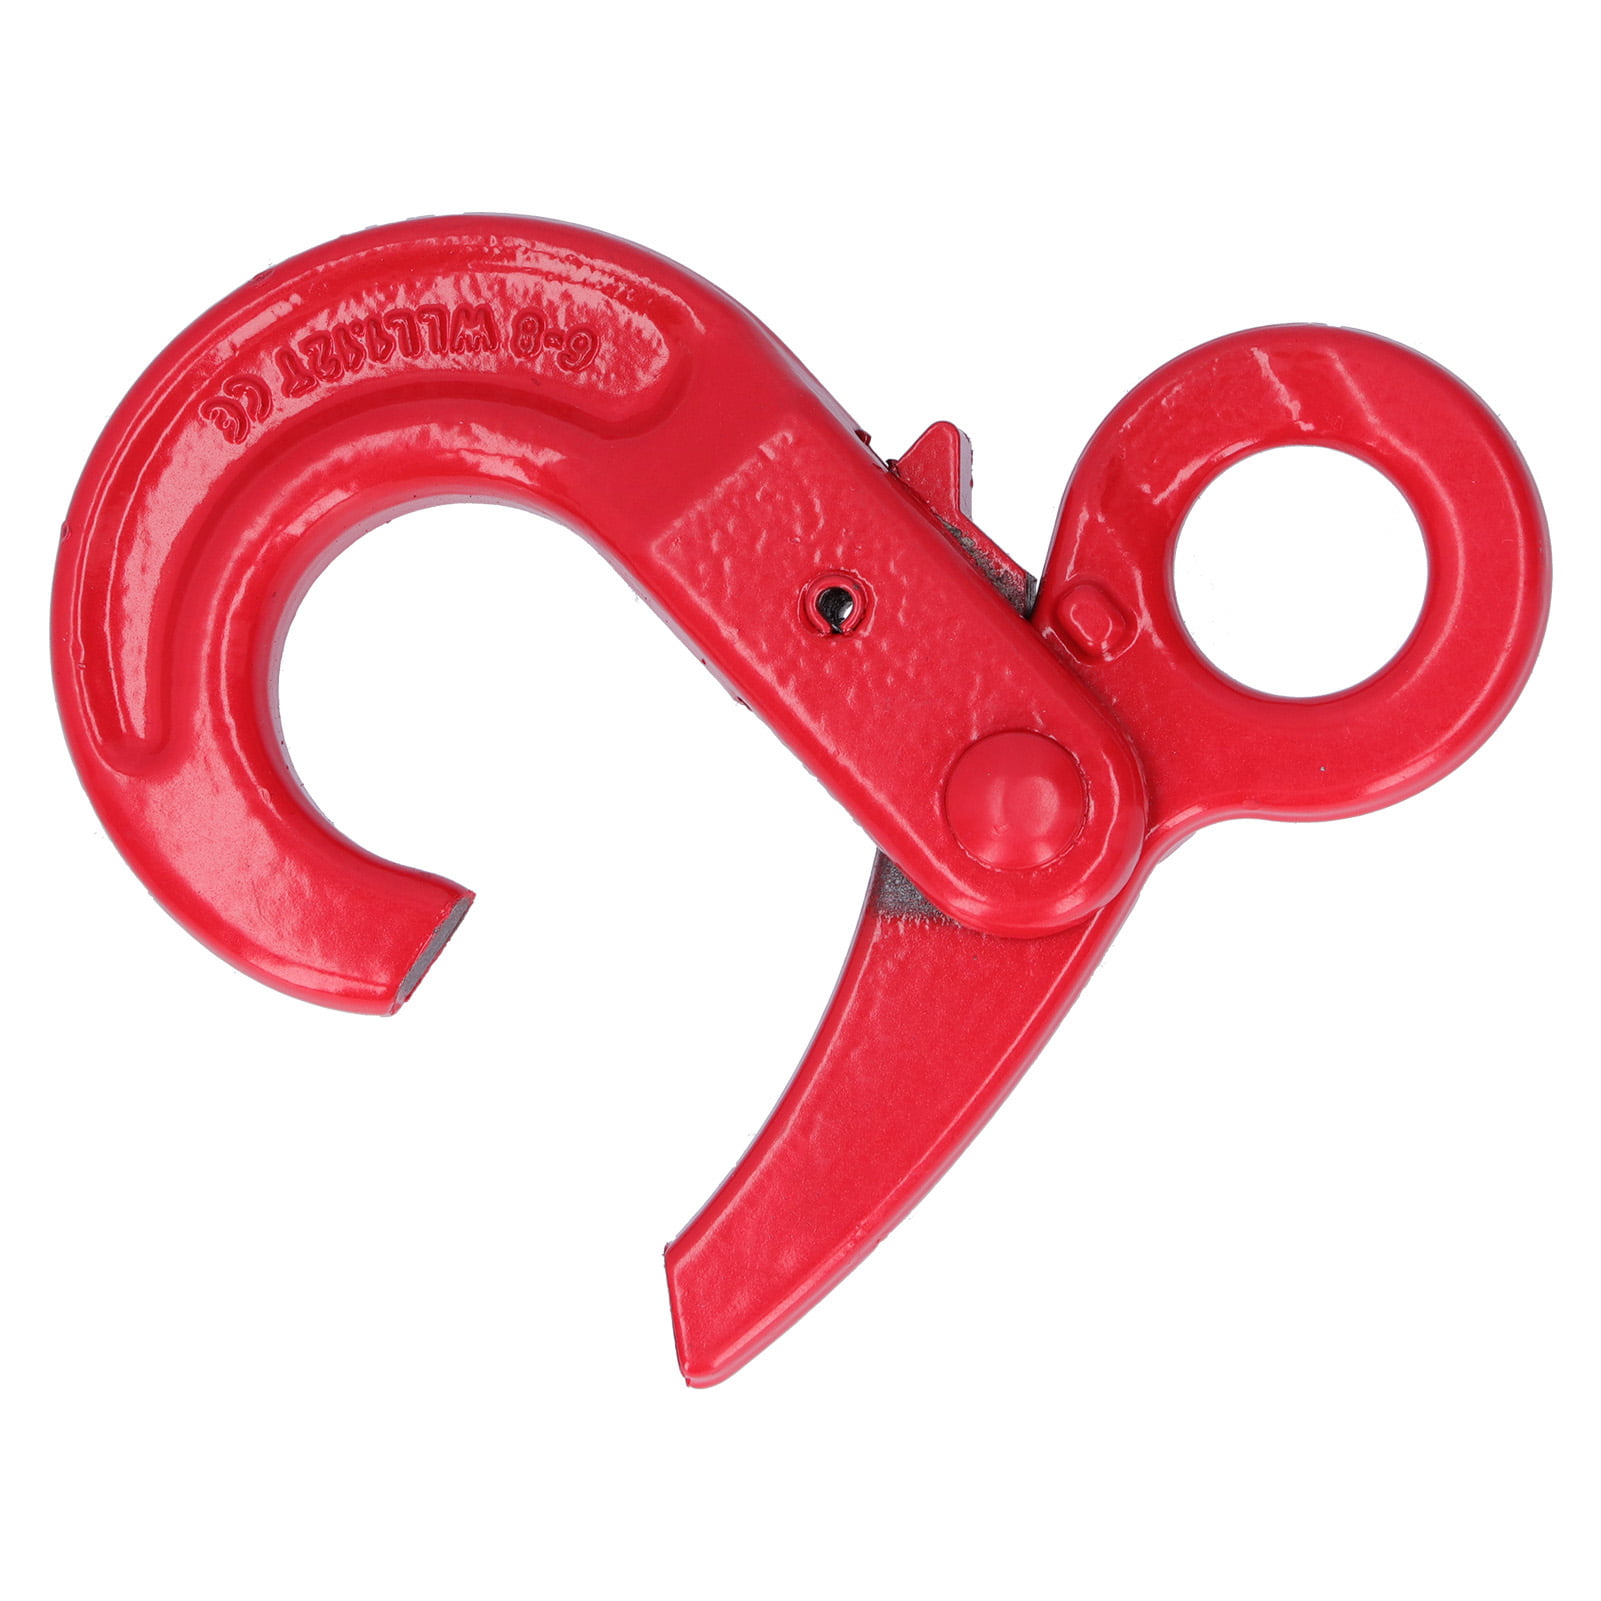 Slip Hook Safty Lock,Slip Hook Safty Lock Self-Locking Eye-Type Safety Lifting Hooks Working Tension 1.12T 